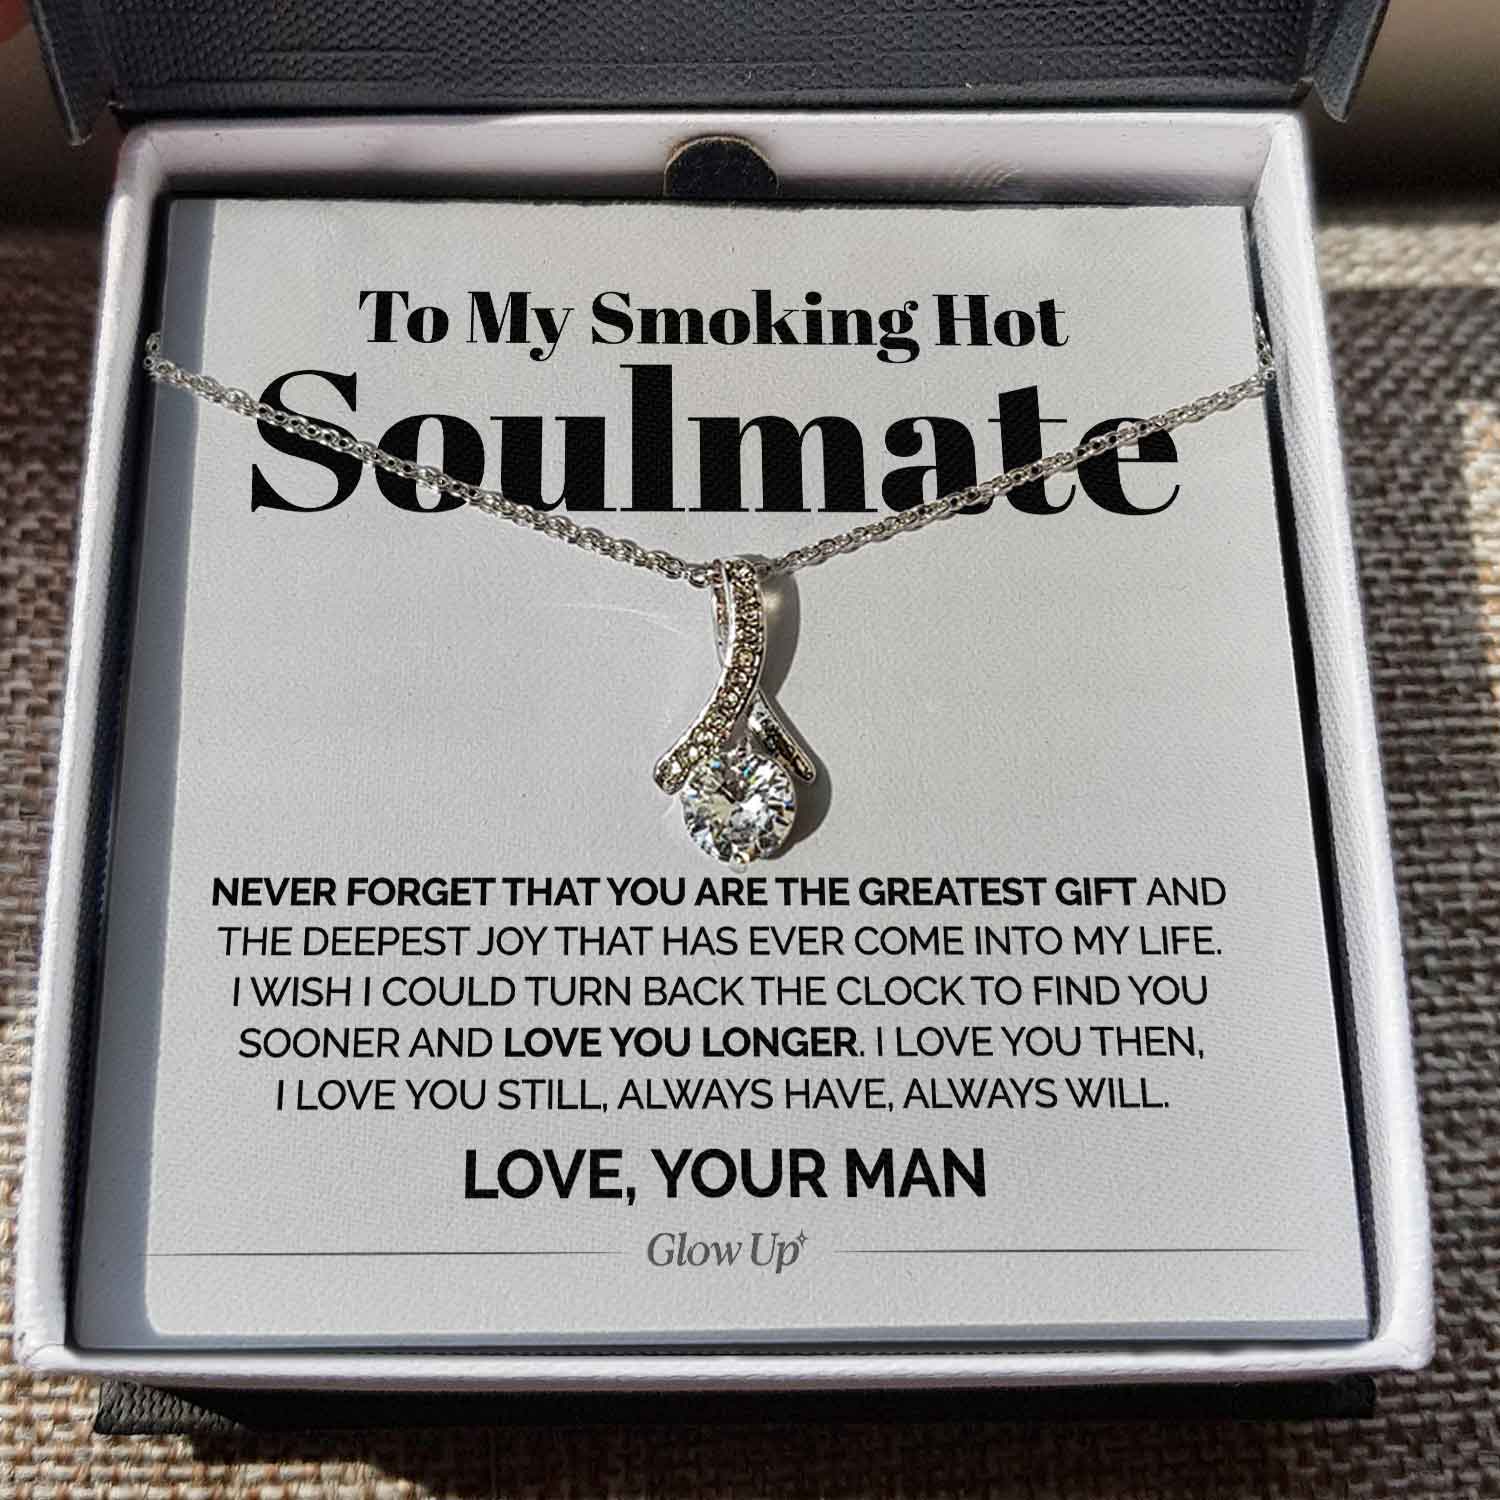 ShineOn Fulfillment Jewelry Standard Box To My Smoking Hot Soulmate - You Are The Greatest Gift - Ribbon Necklace